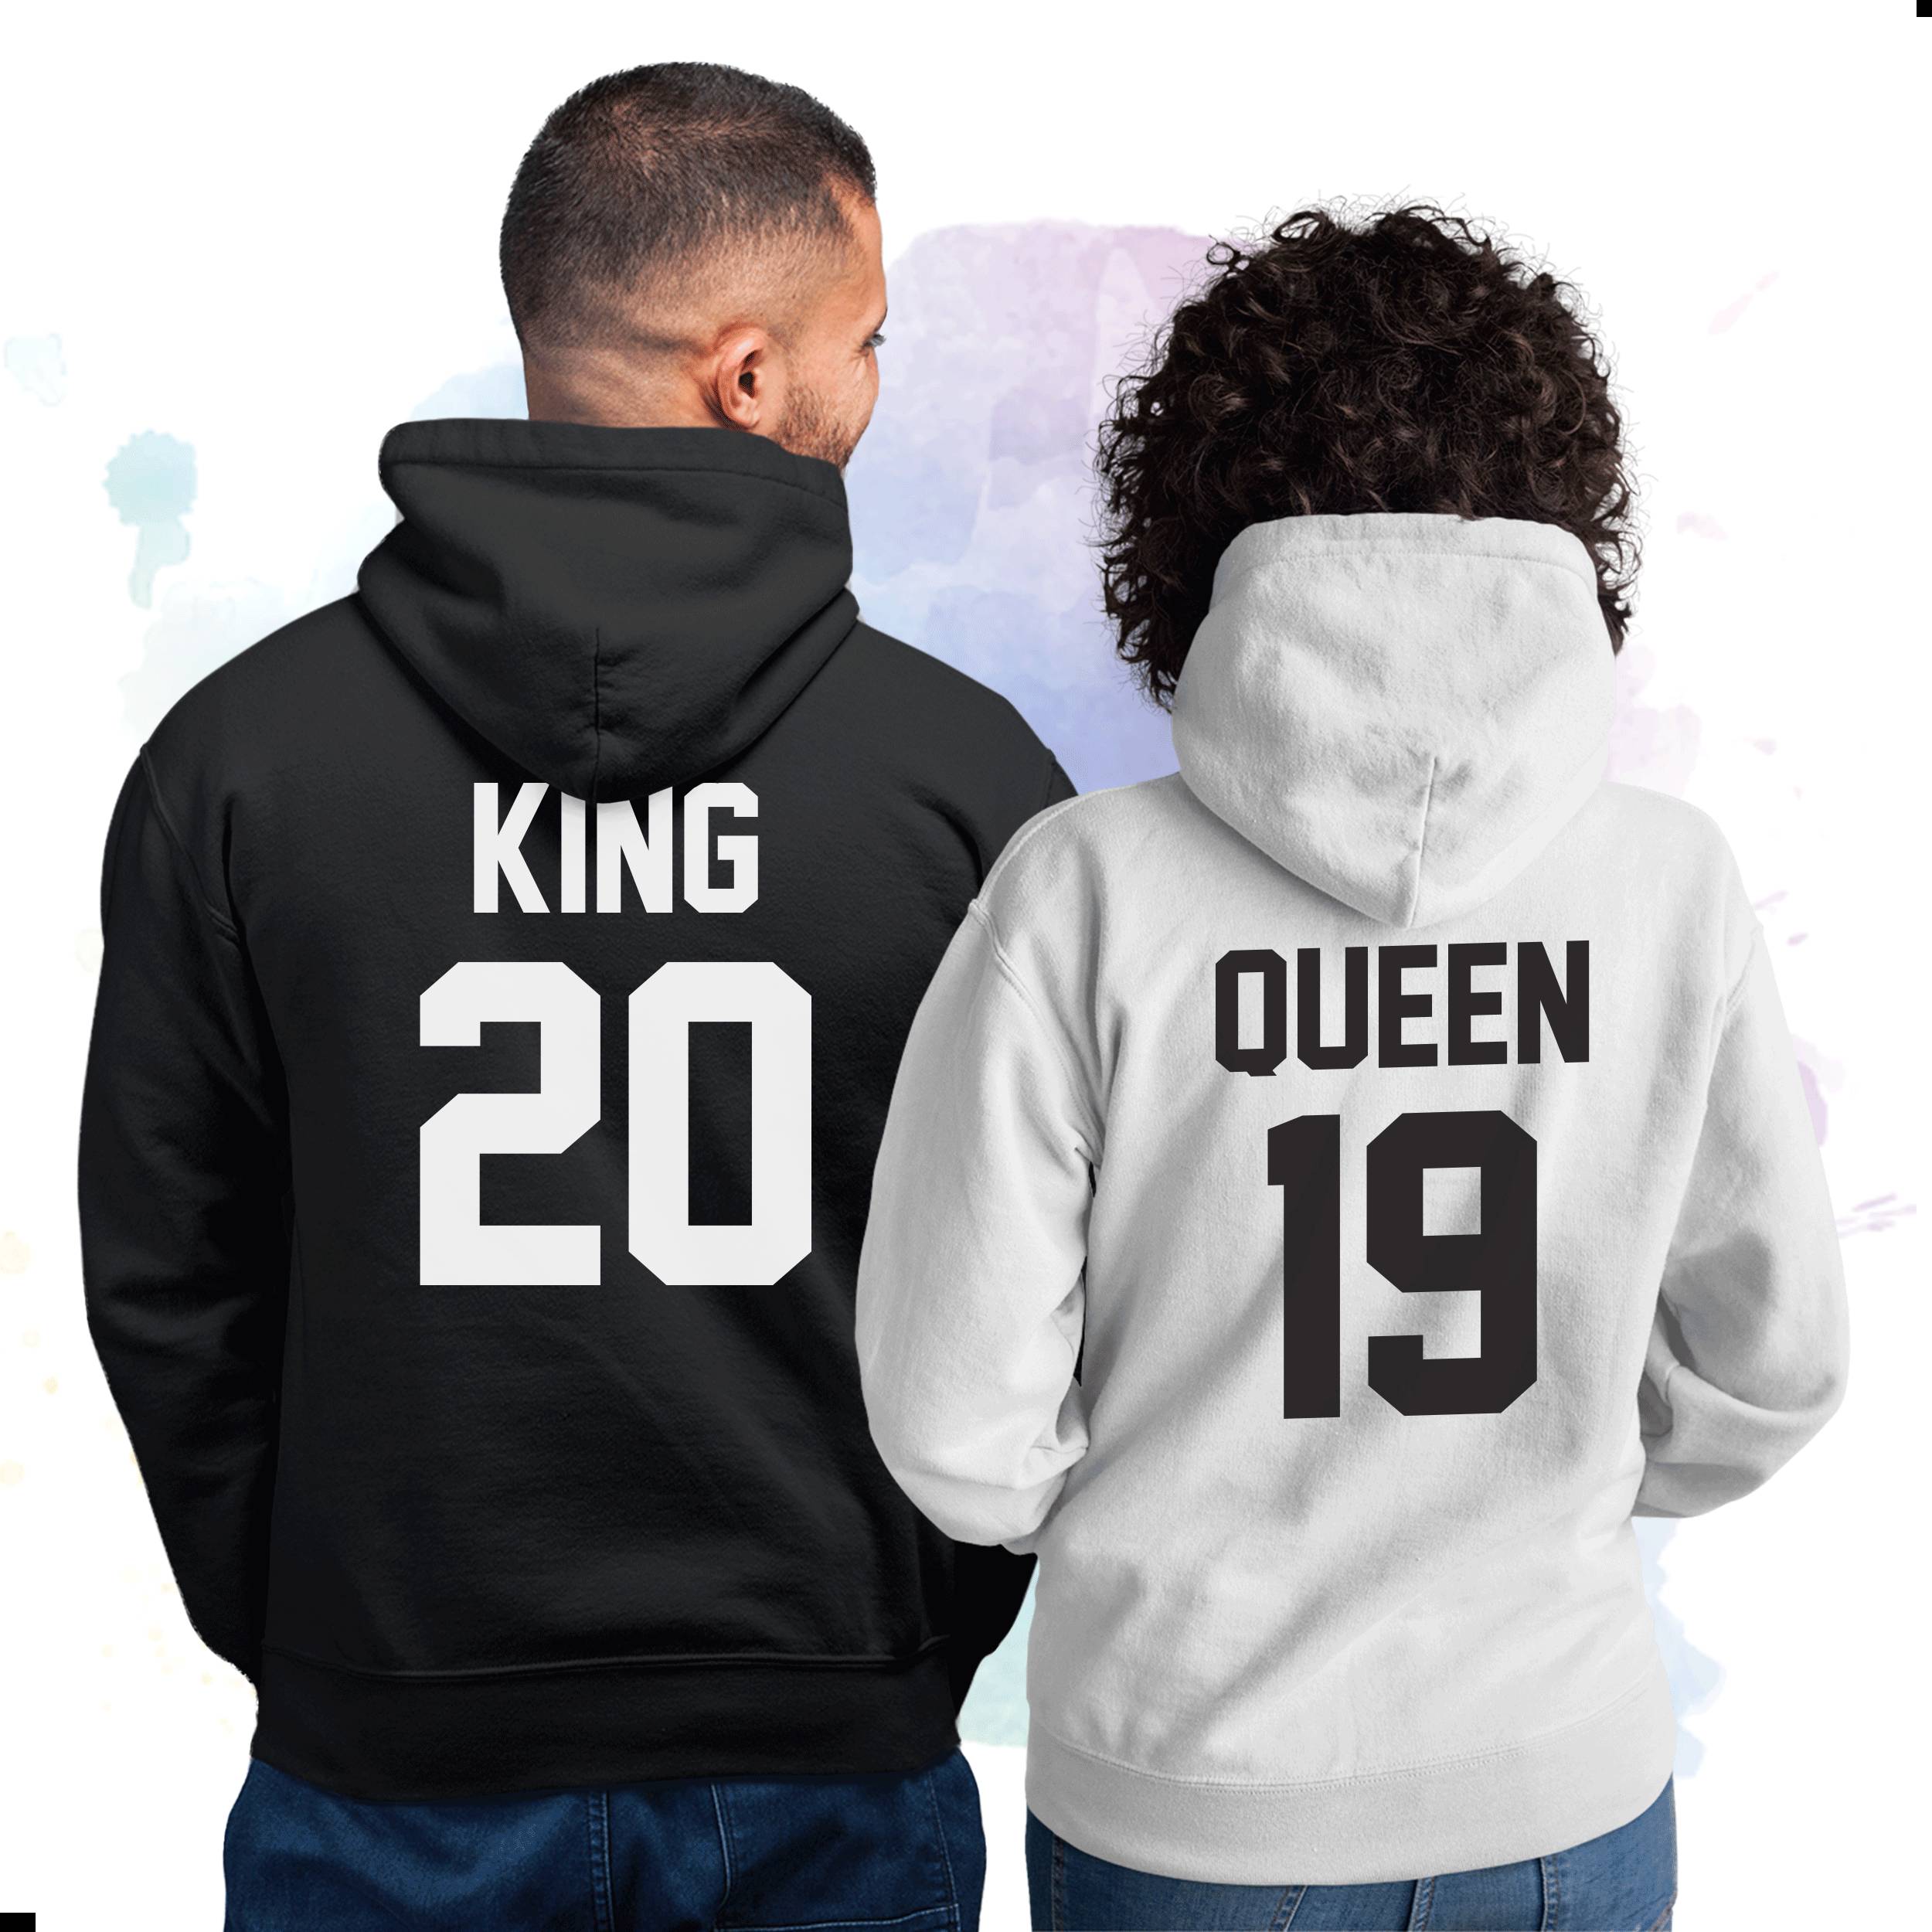 Hoodie King Queen Princess Shop Clothing Shoes Online